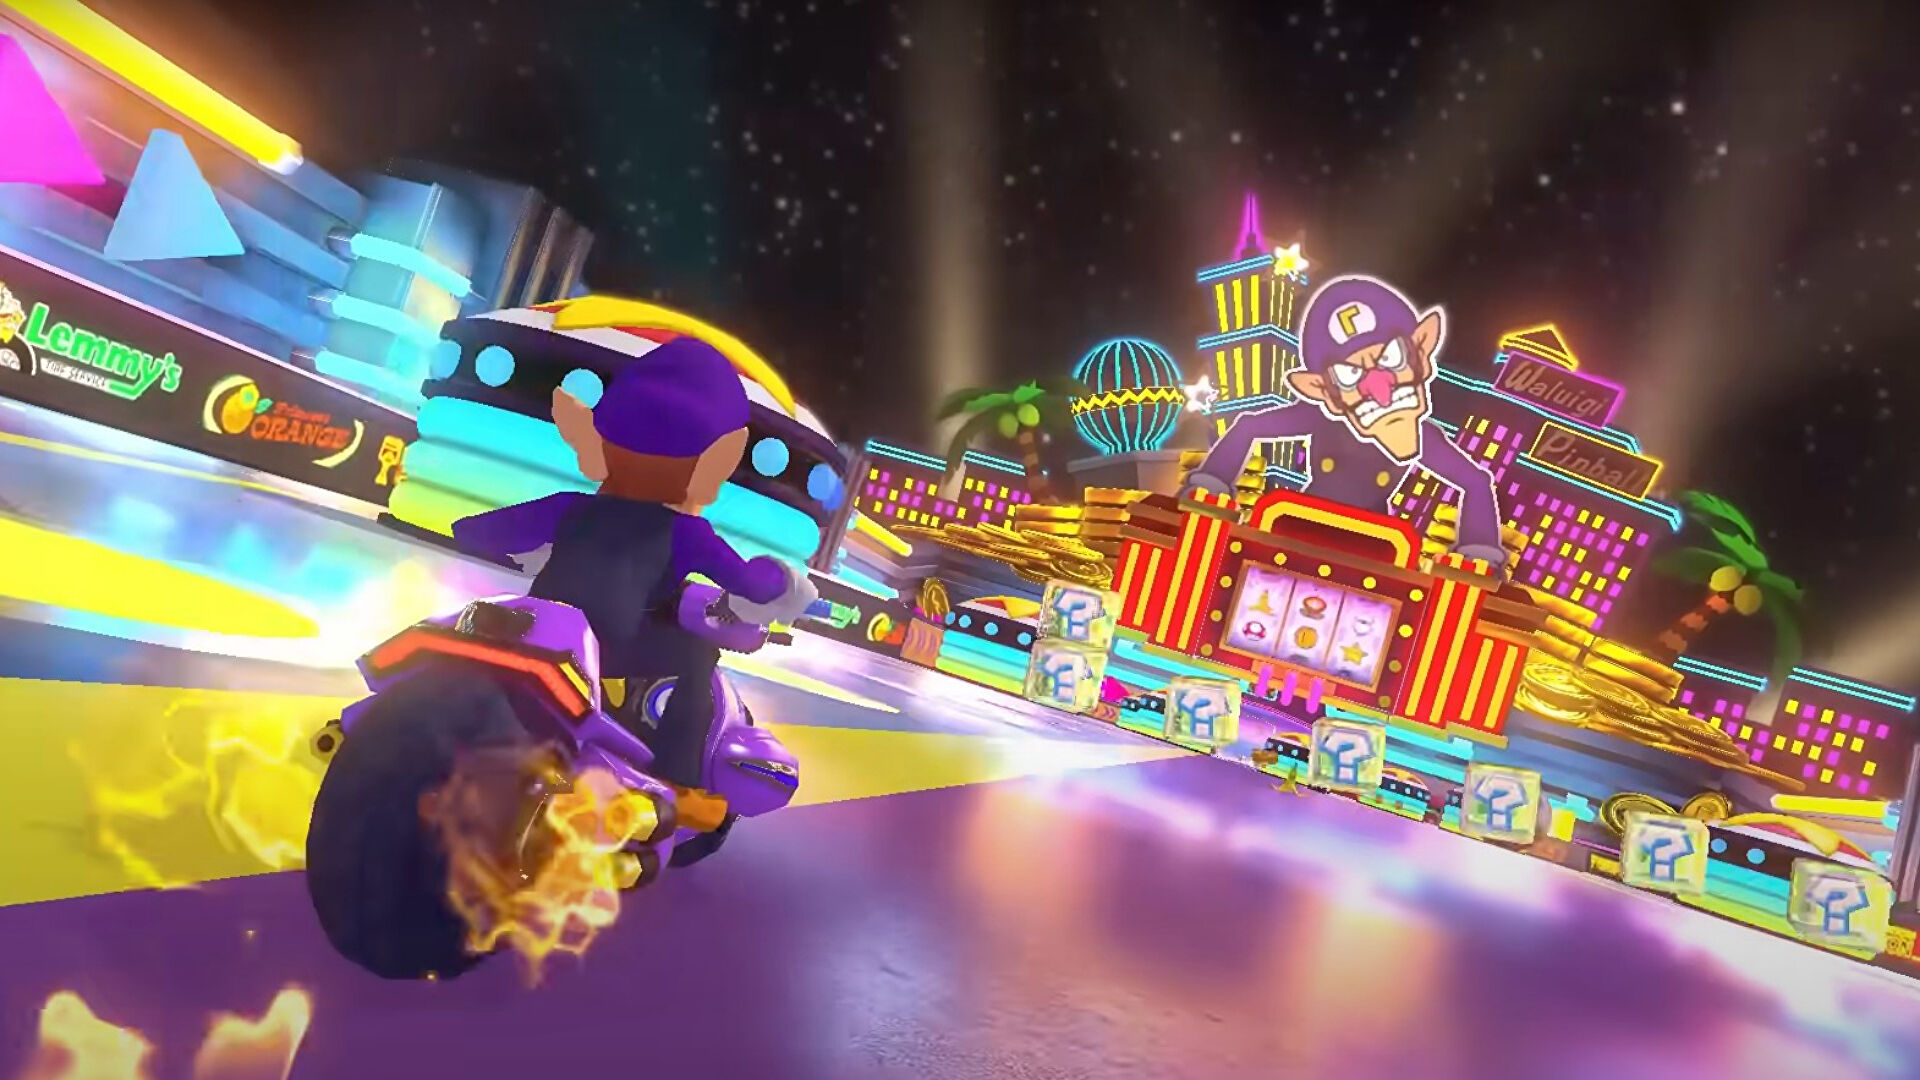 It’s Mario Kart DS’ 17th anniversary, and Waluigi Pinball is still one of the best tracks in the series